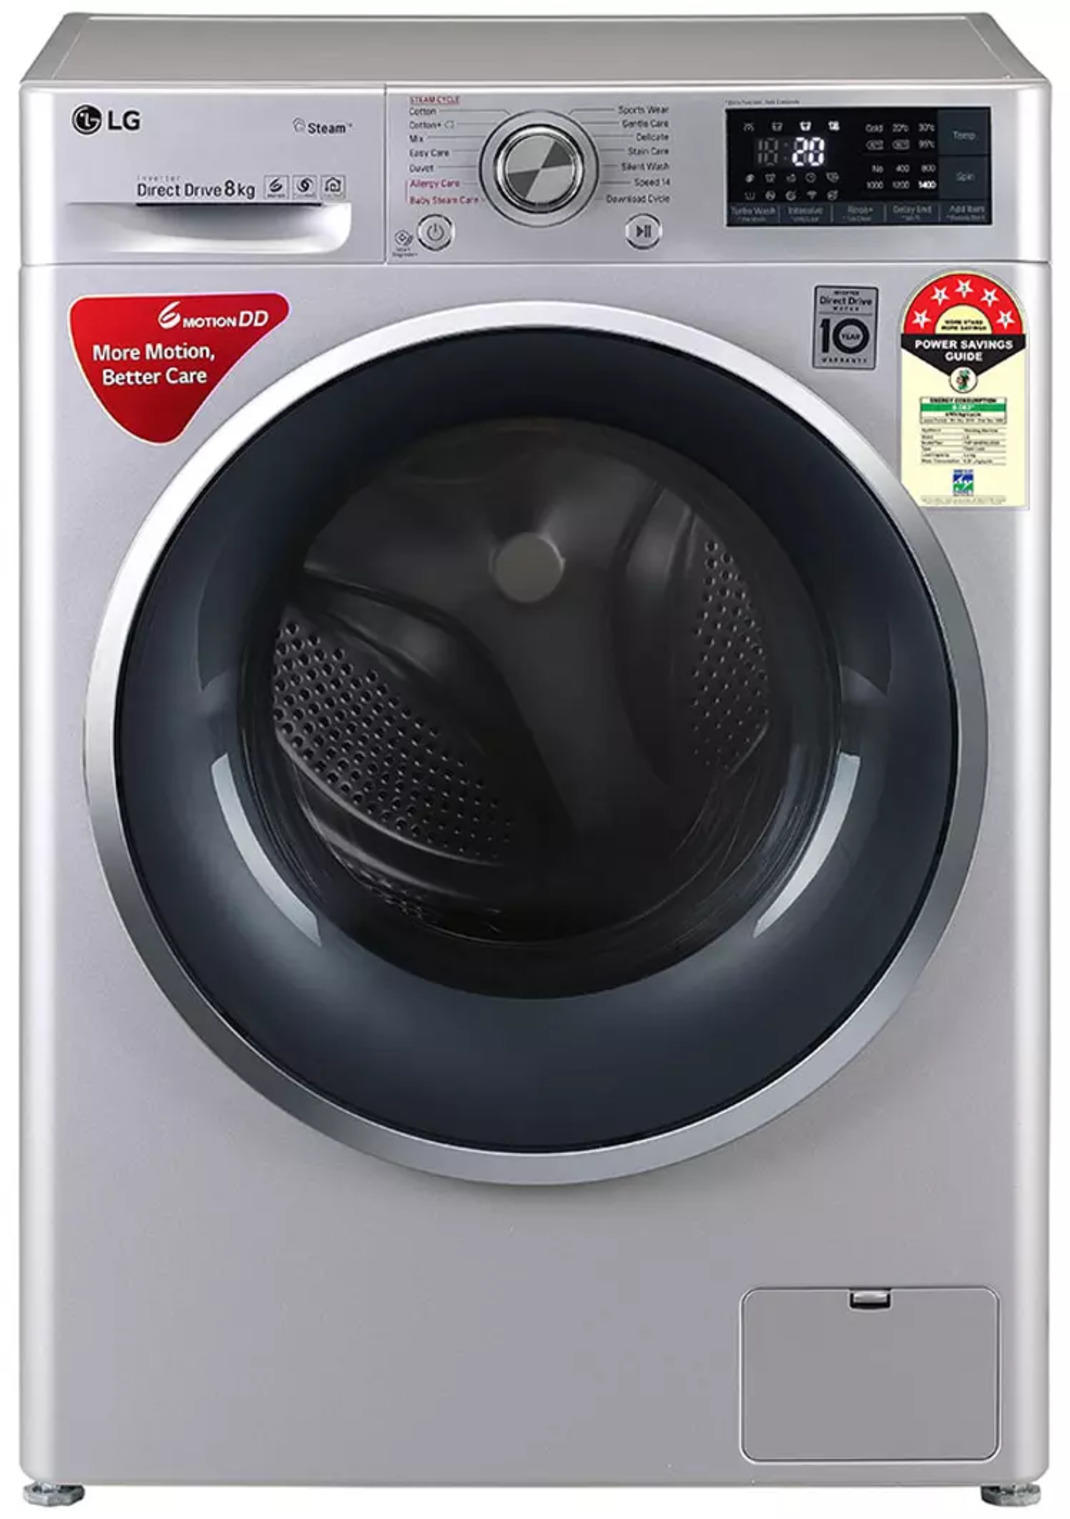 Compare LG FHT1408ZWL 8.0 Kg Fully Automatic Front Load Washing Machine